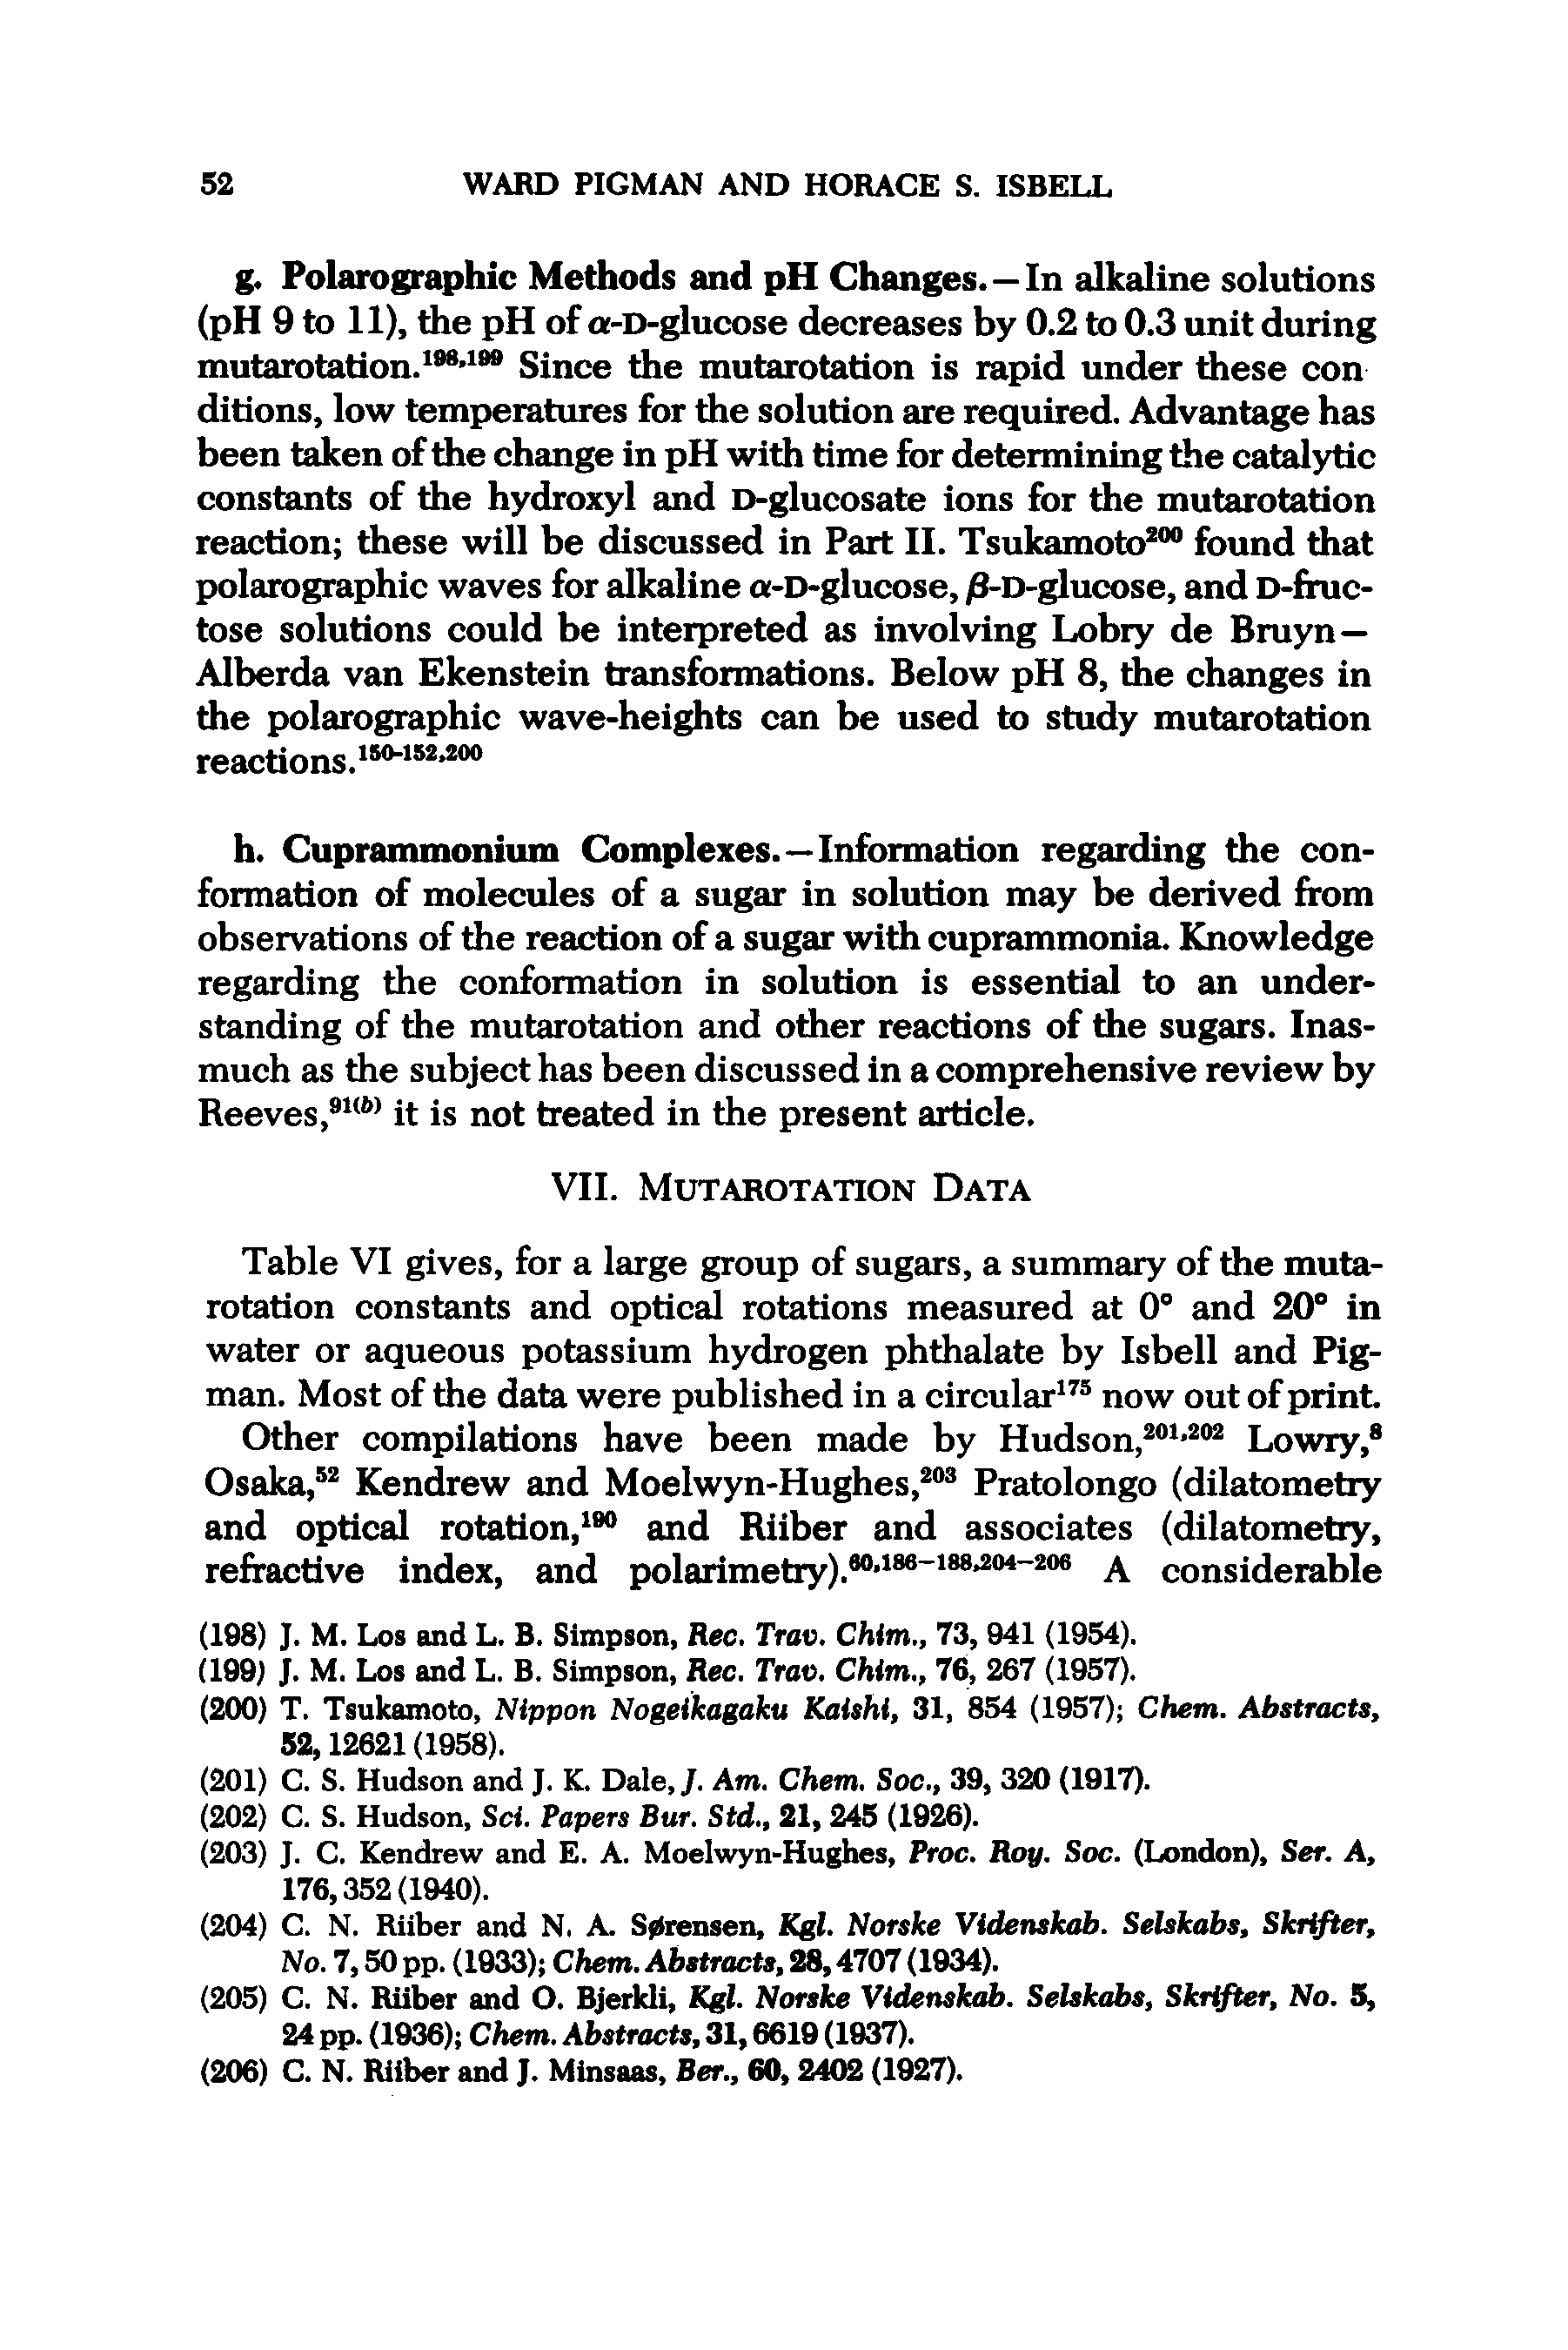 Table VI gives, for a large group of sugars, a summary of the mutarotation constants and optical rotations measured at 0 and 20 in water or aqueous potassium hydrogen phthalate by Isbell and Pig-man. Most of the data were published in a circular now out of print Other compilations have been made by Hudson, Lowry, Osaka, Kendrew and Moelwyn-Hughes, Pratolongo (dilatometry and optical rotation, and Riiber and associates (dilatometry, refractive index, and polarimetry). " A considerable...